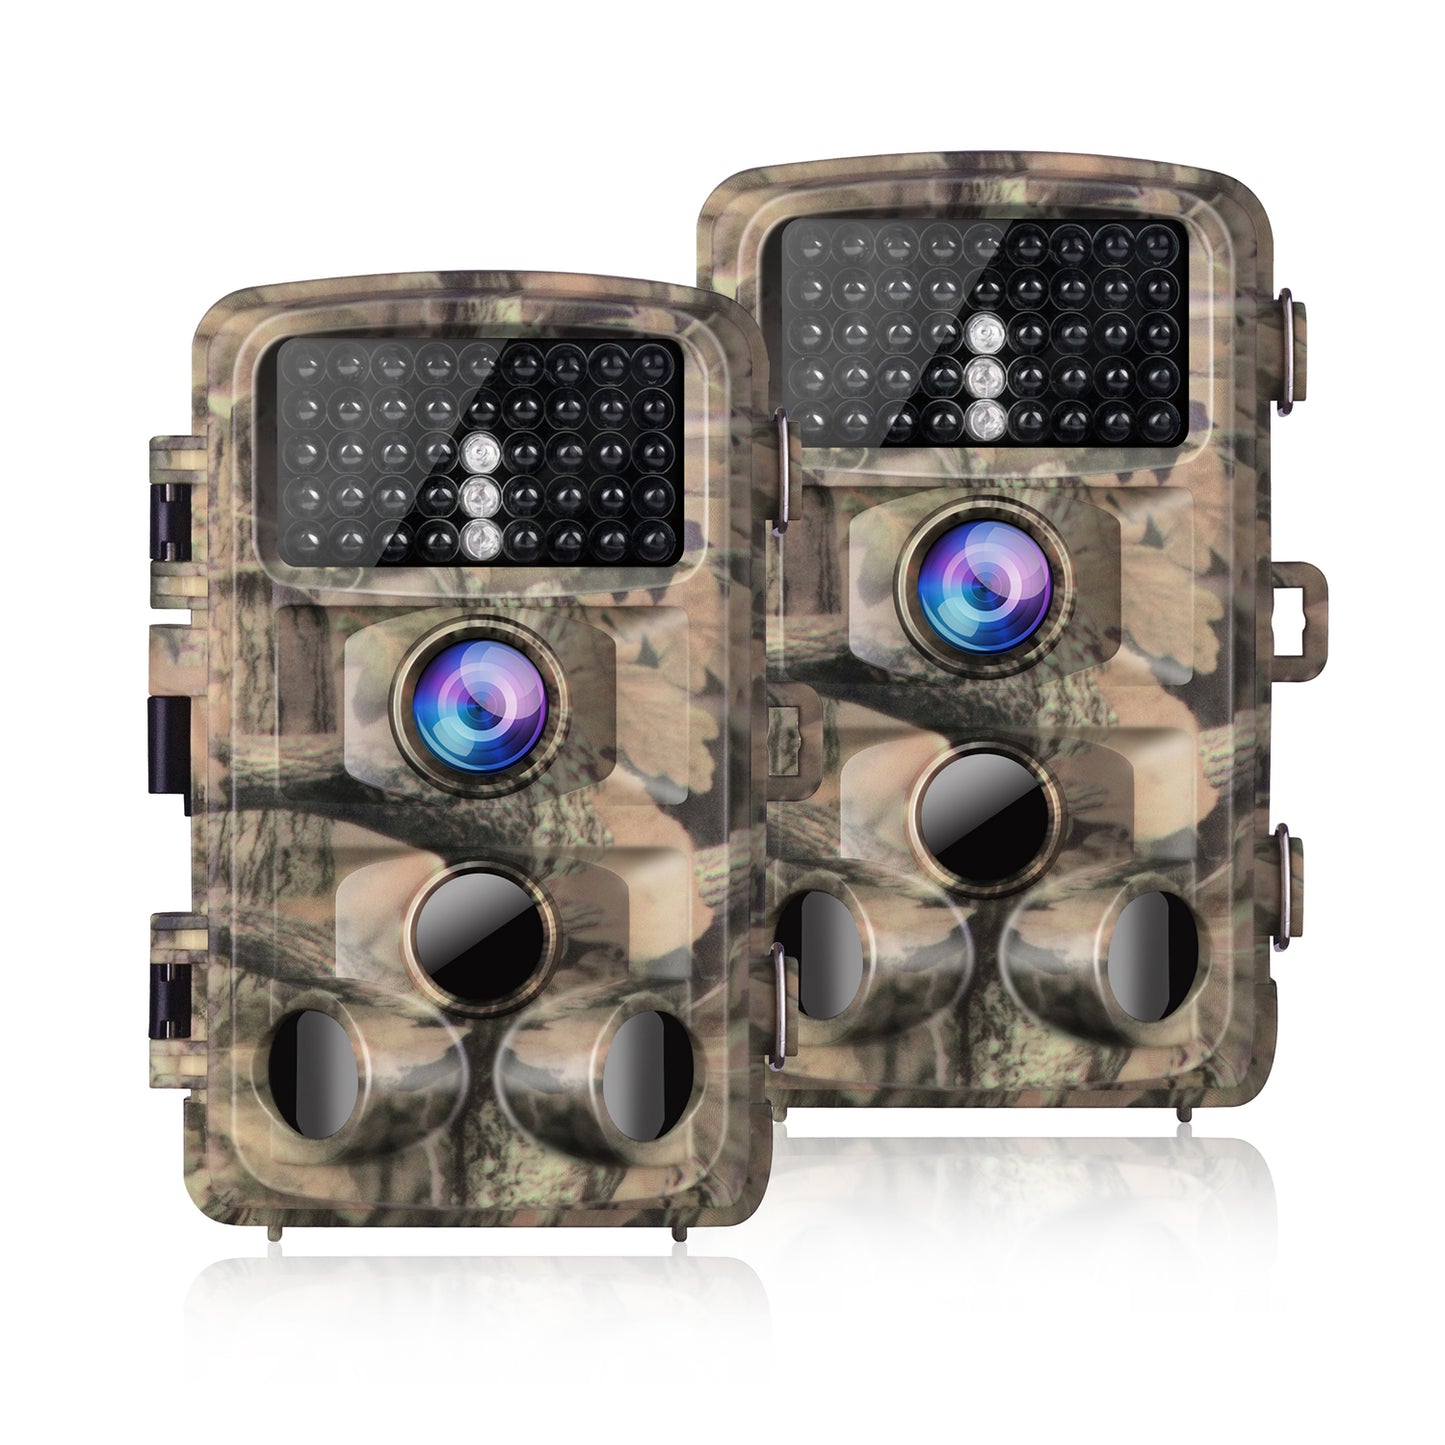 CAMPARK 2PACK 4K 20MP Trail Camera Night Vision Deer Game Camera with 120° Wide-Angle,2.4"LCD IP56 Waterproof, 3 Infrared Sensors Hunting Camera for Wildlife Monitorin